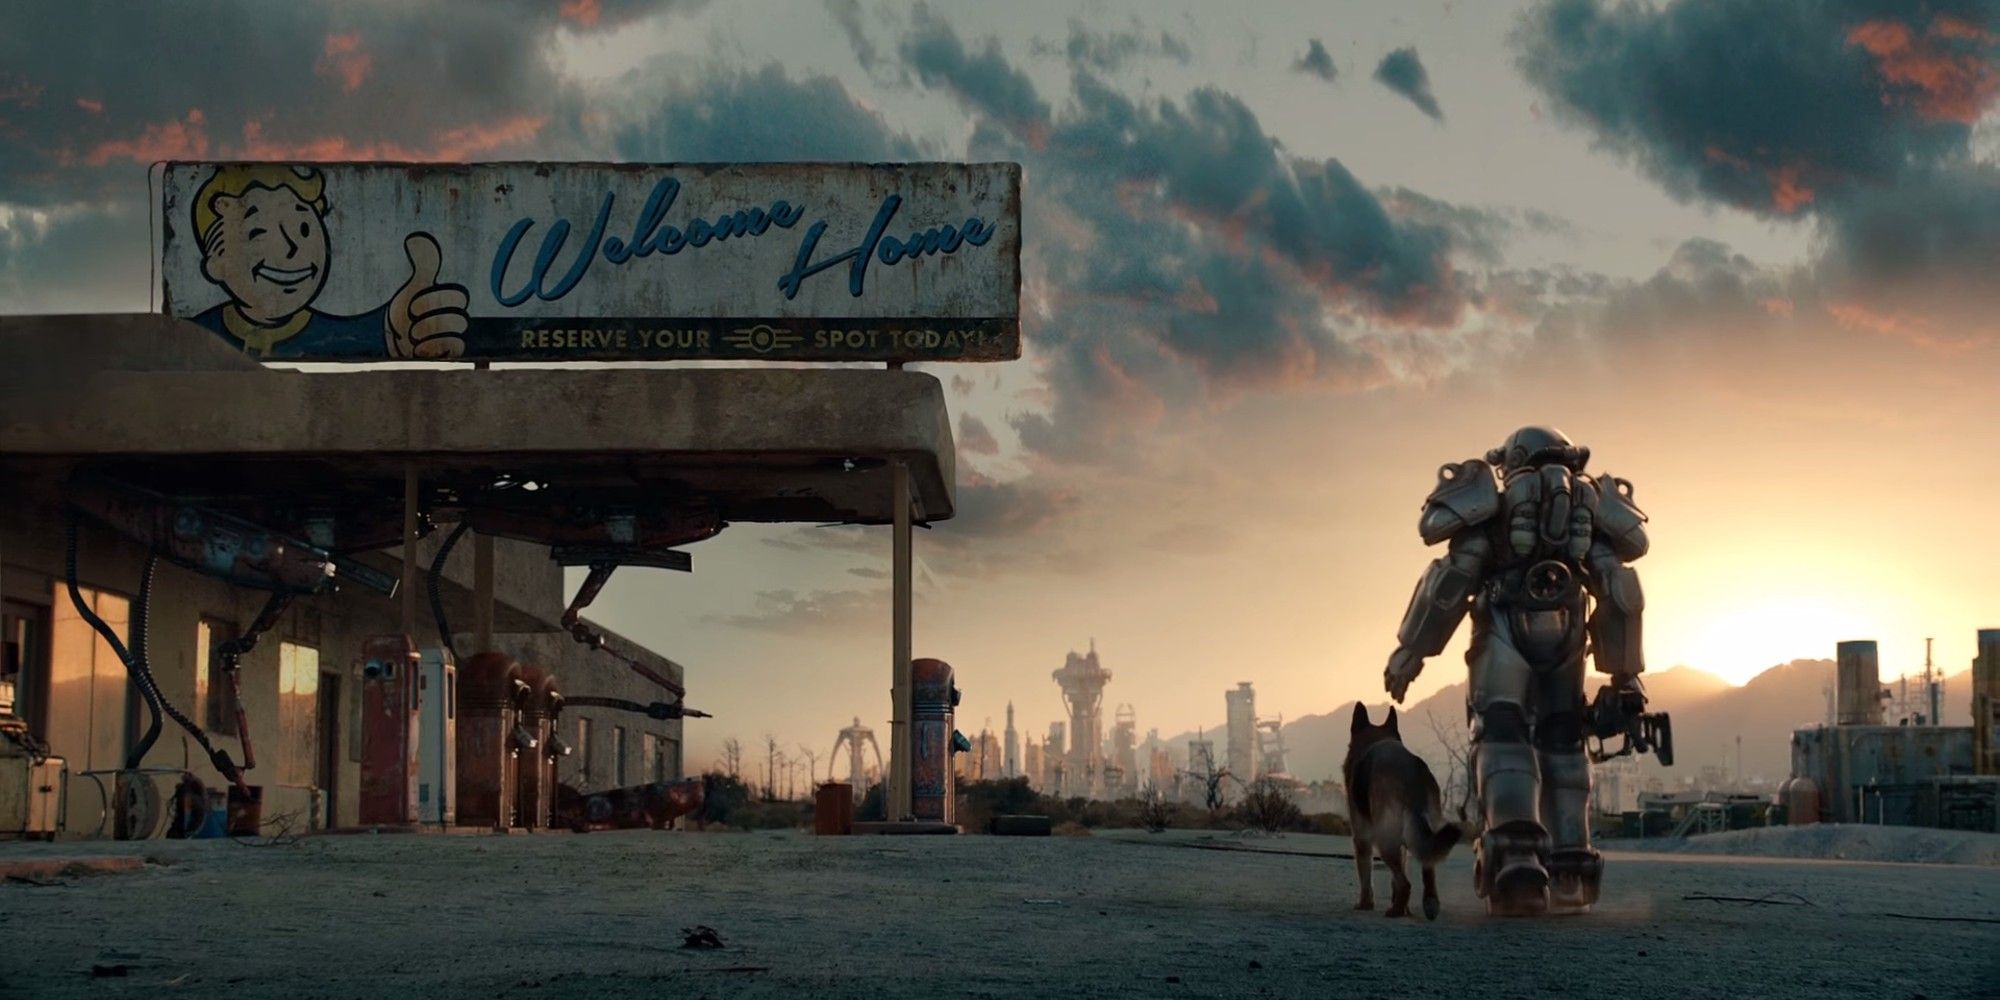 Fallout 4 the sole survivor in power armor with his dog, walking into the sunset